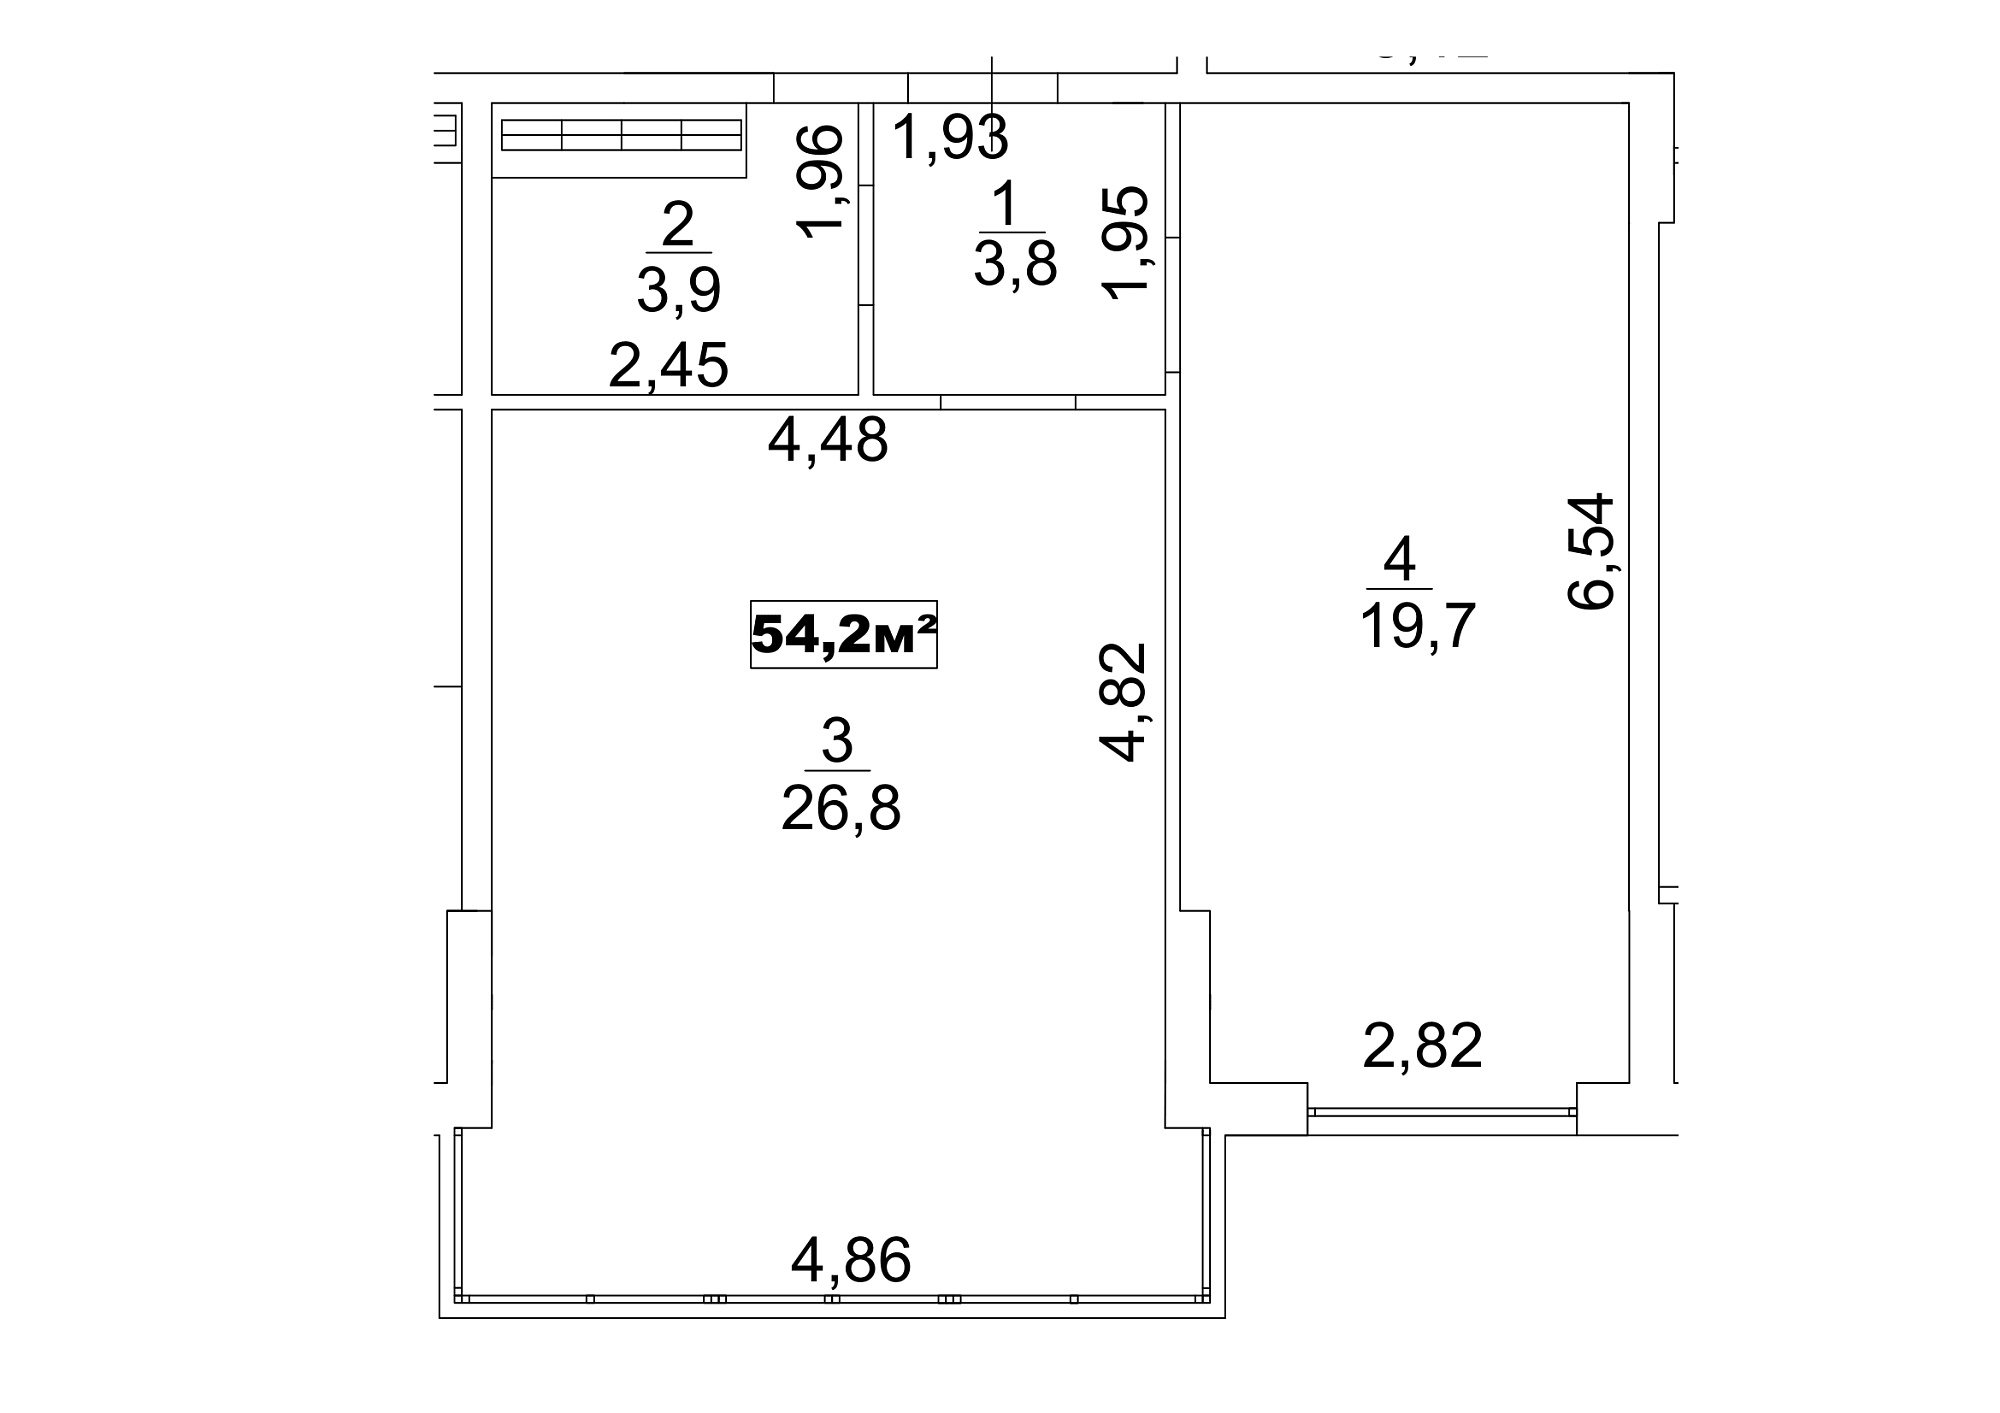 Planning 1-rm flats area 54.2m2, AB-13-09/00077.